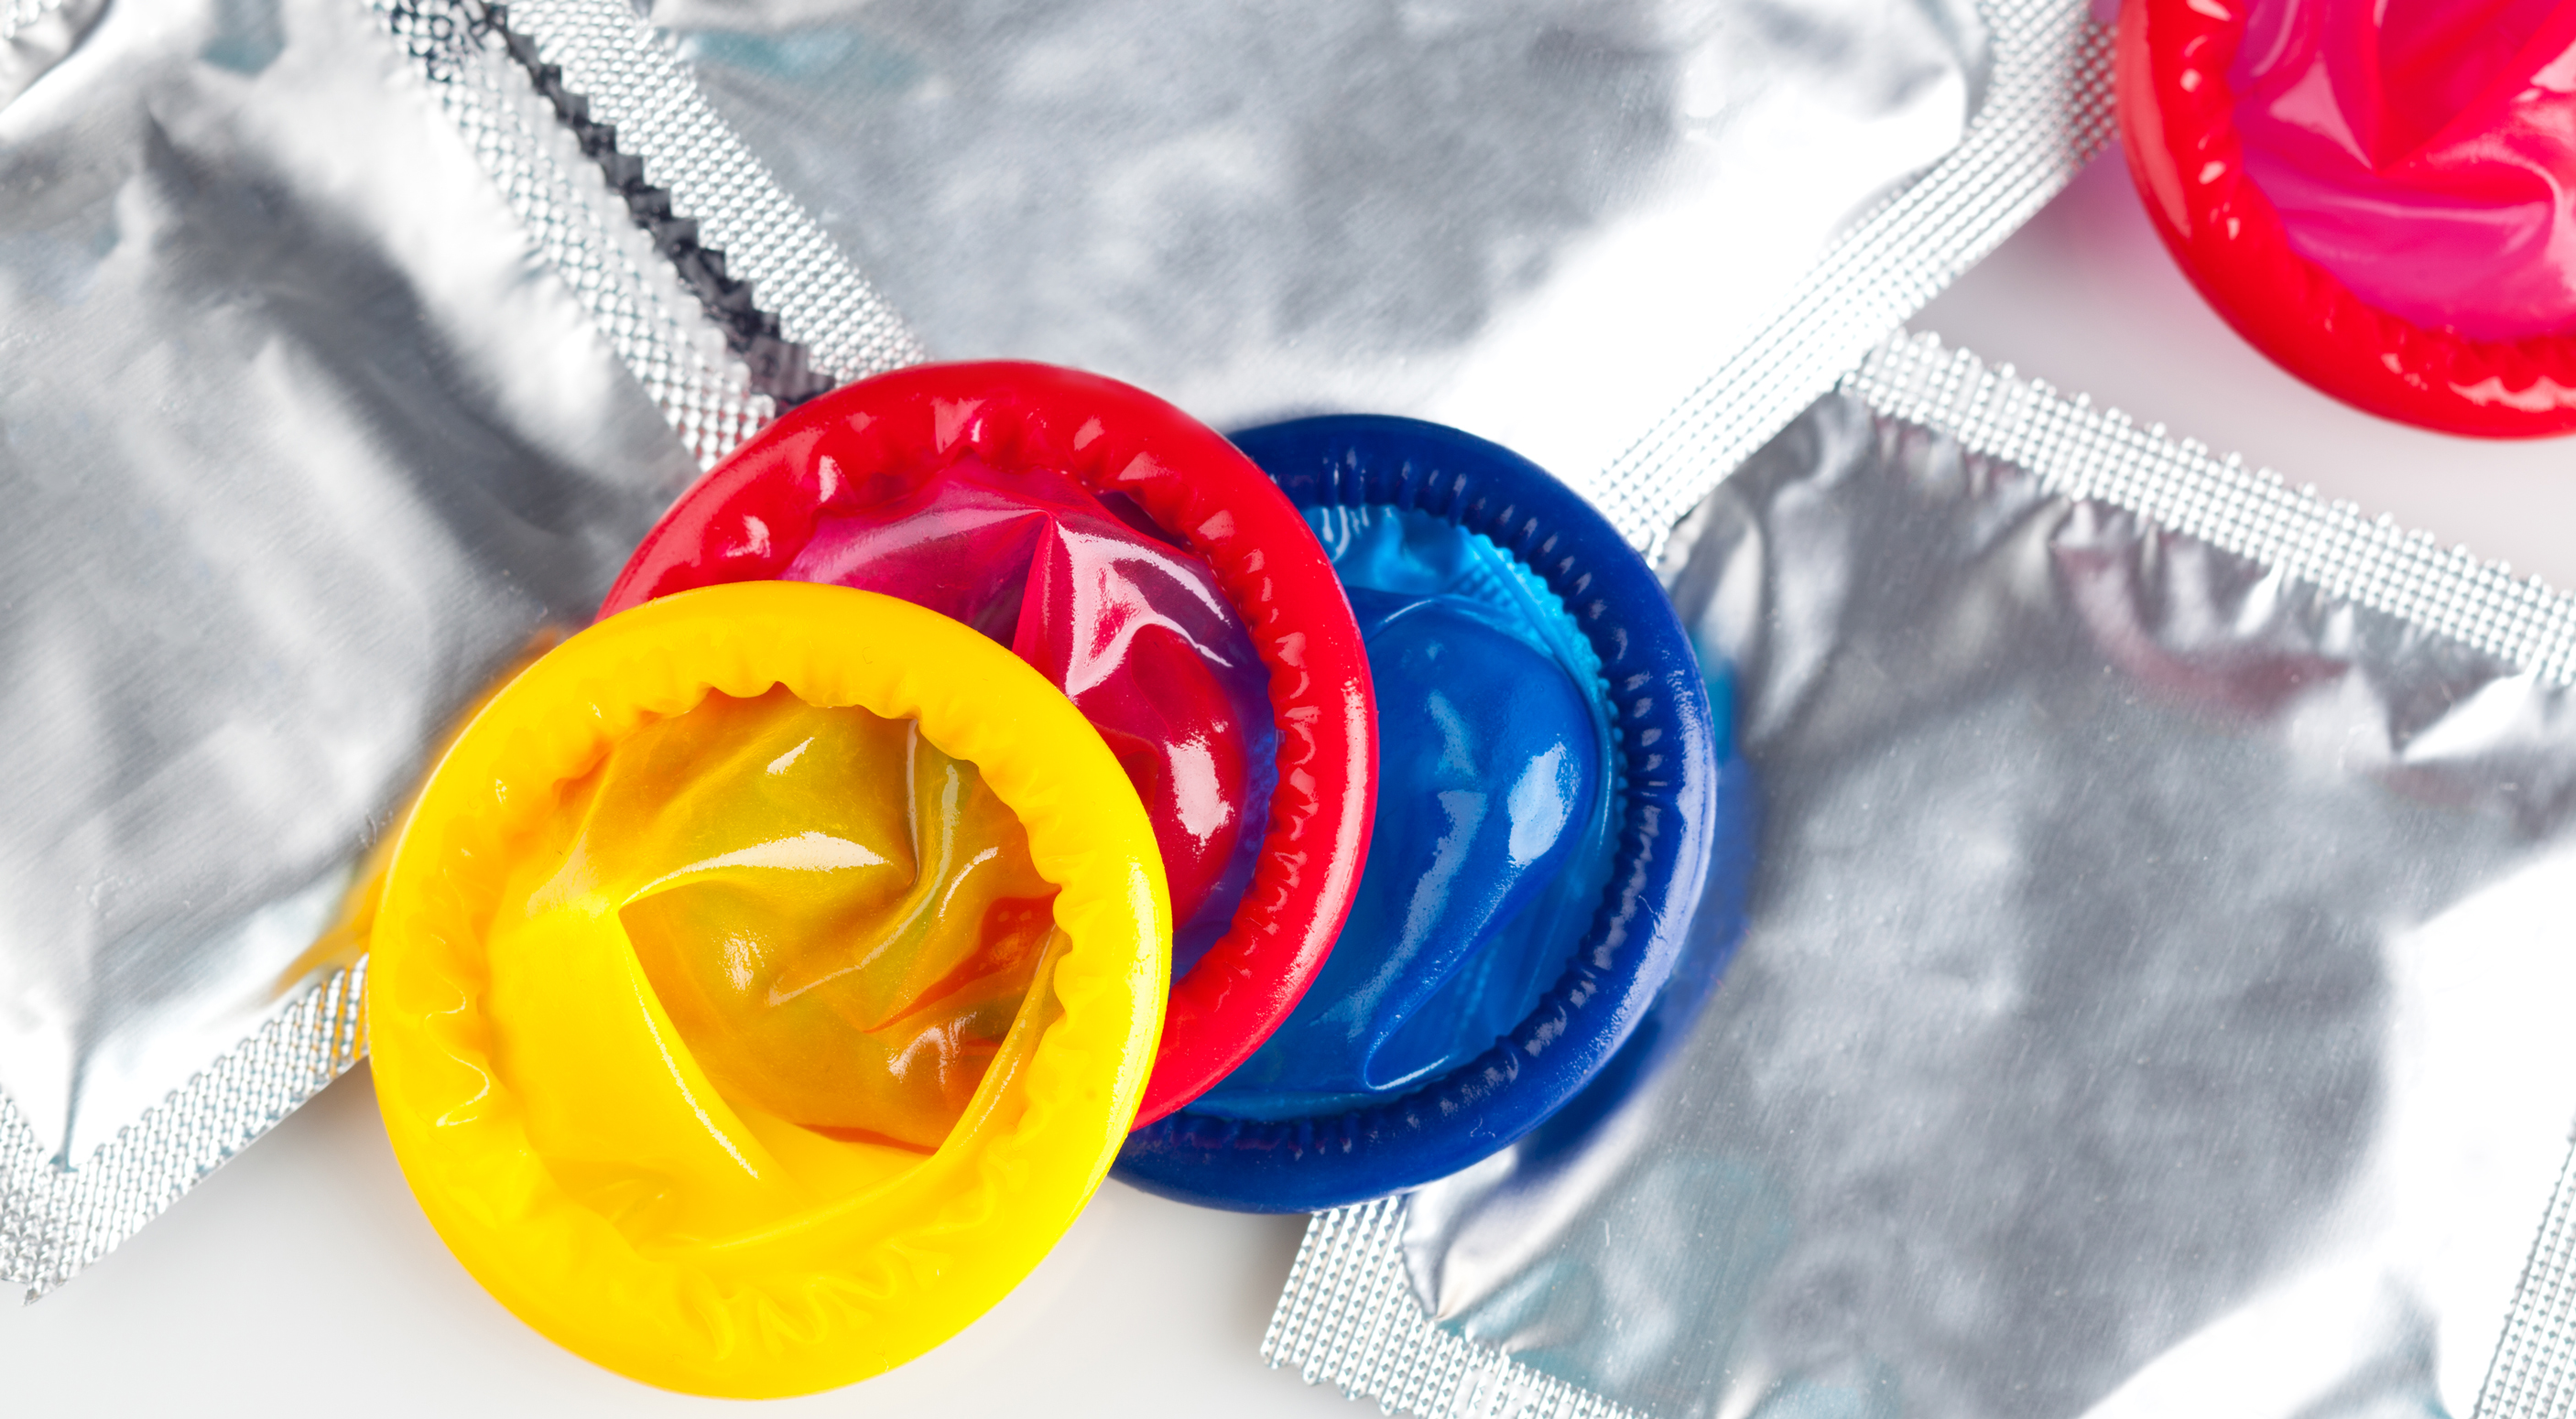 yellow, red, and blue condoms